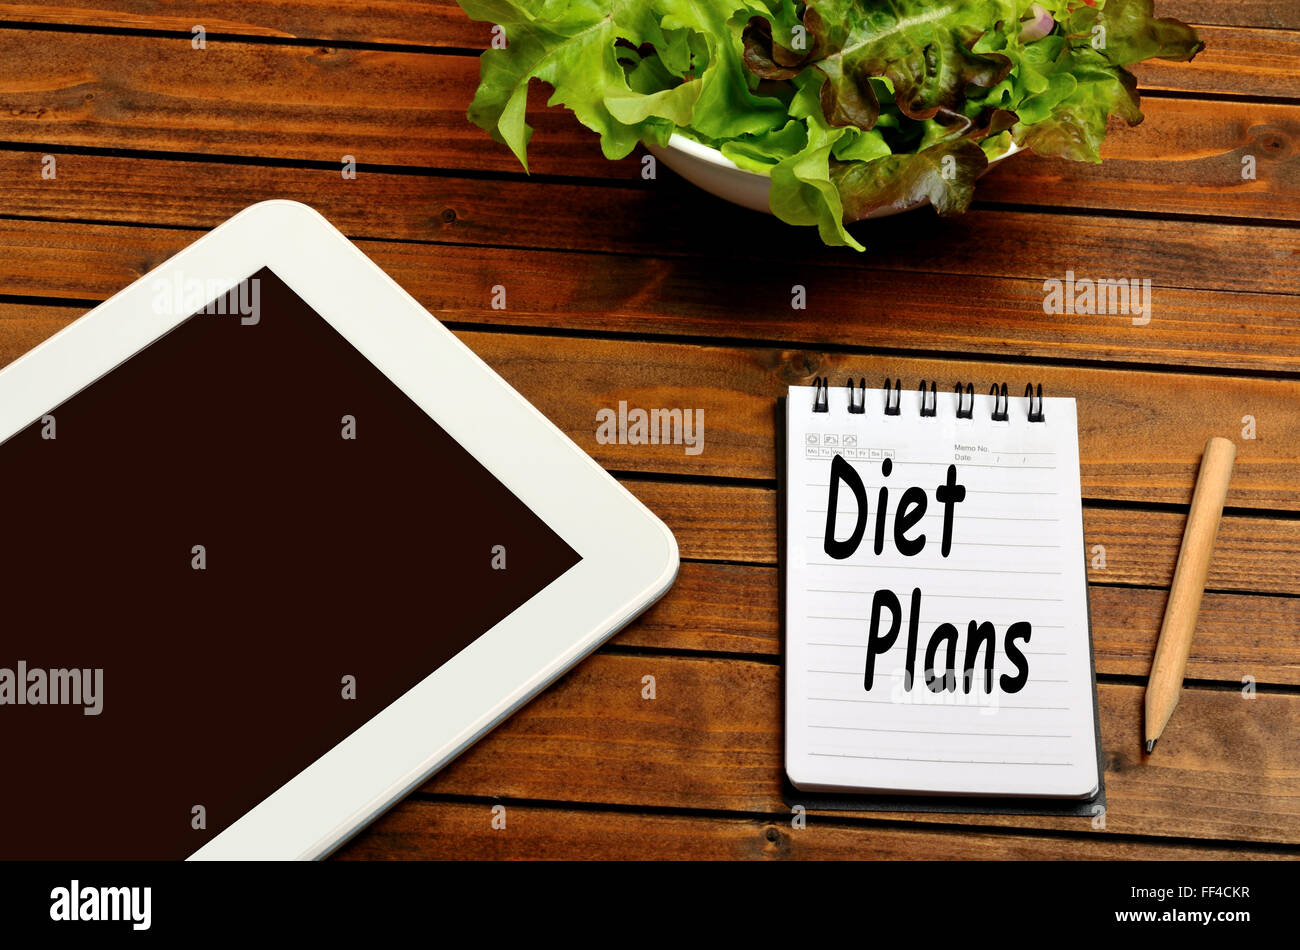 Diet plans words on notebook Stock Photo